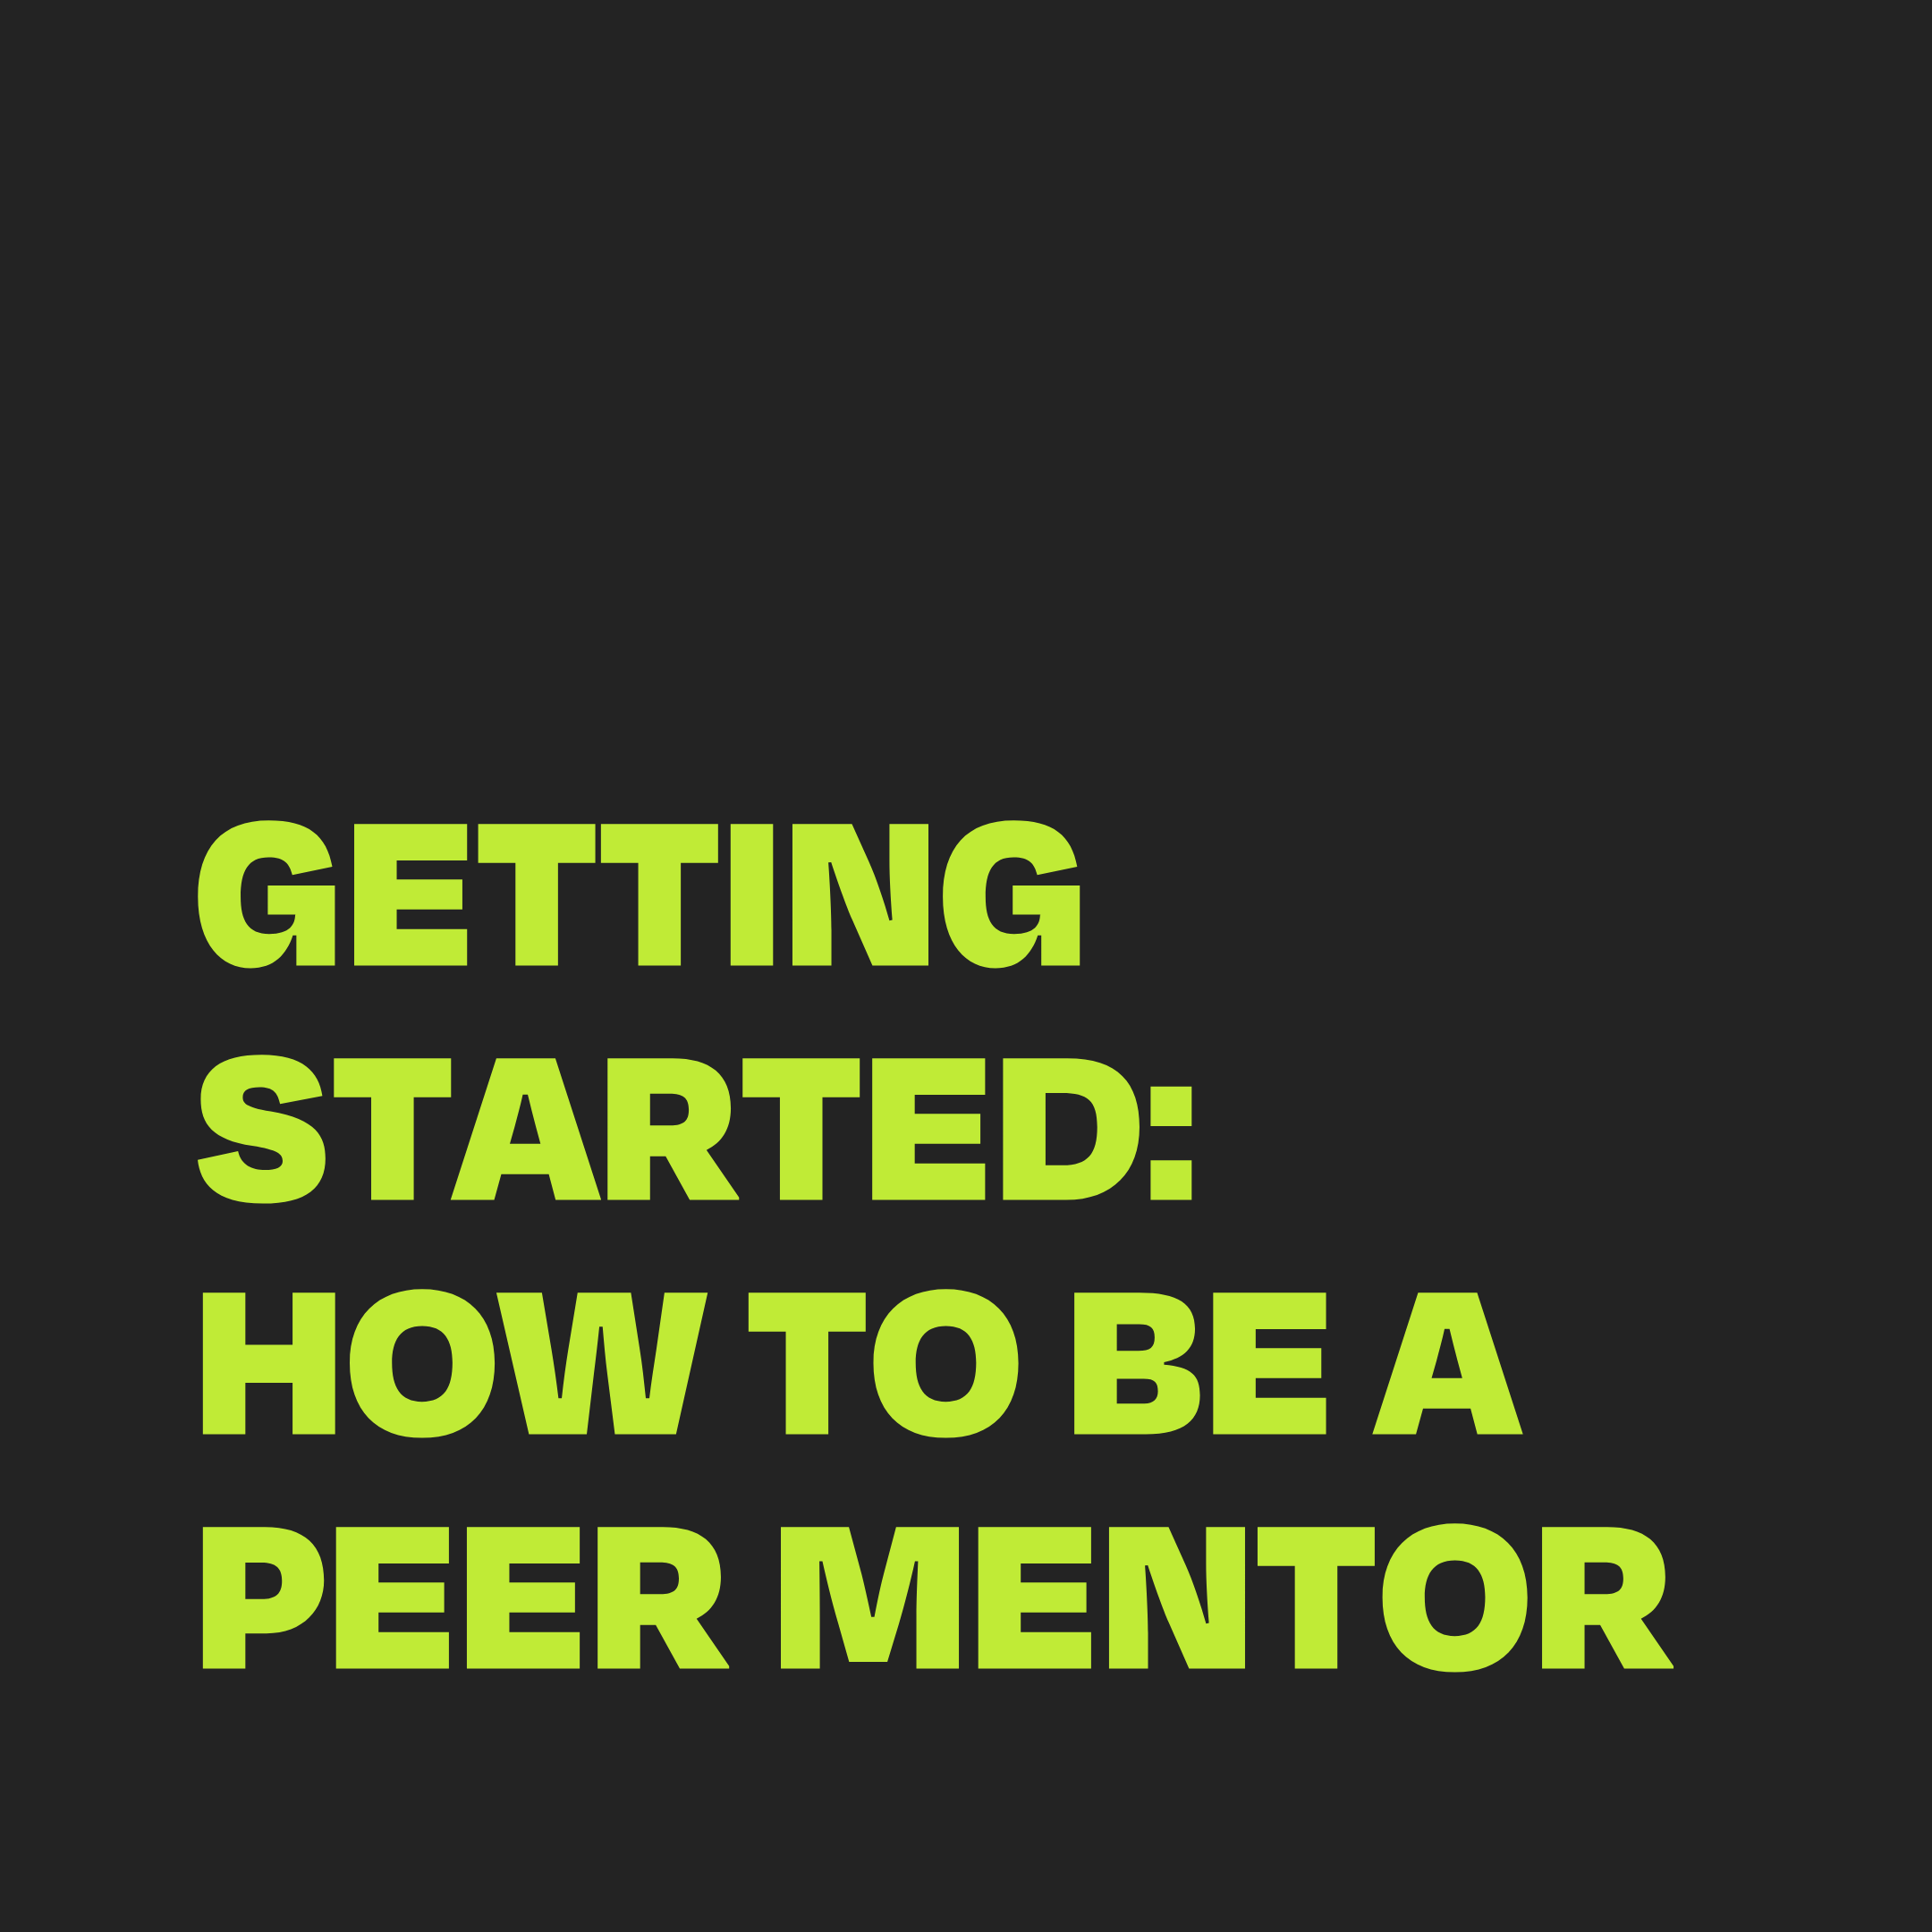 Getting Started: How to be a Peer Mentor